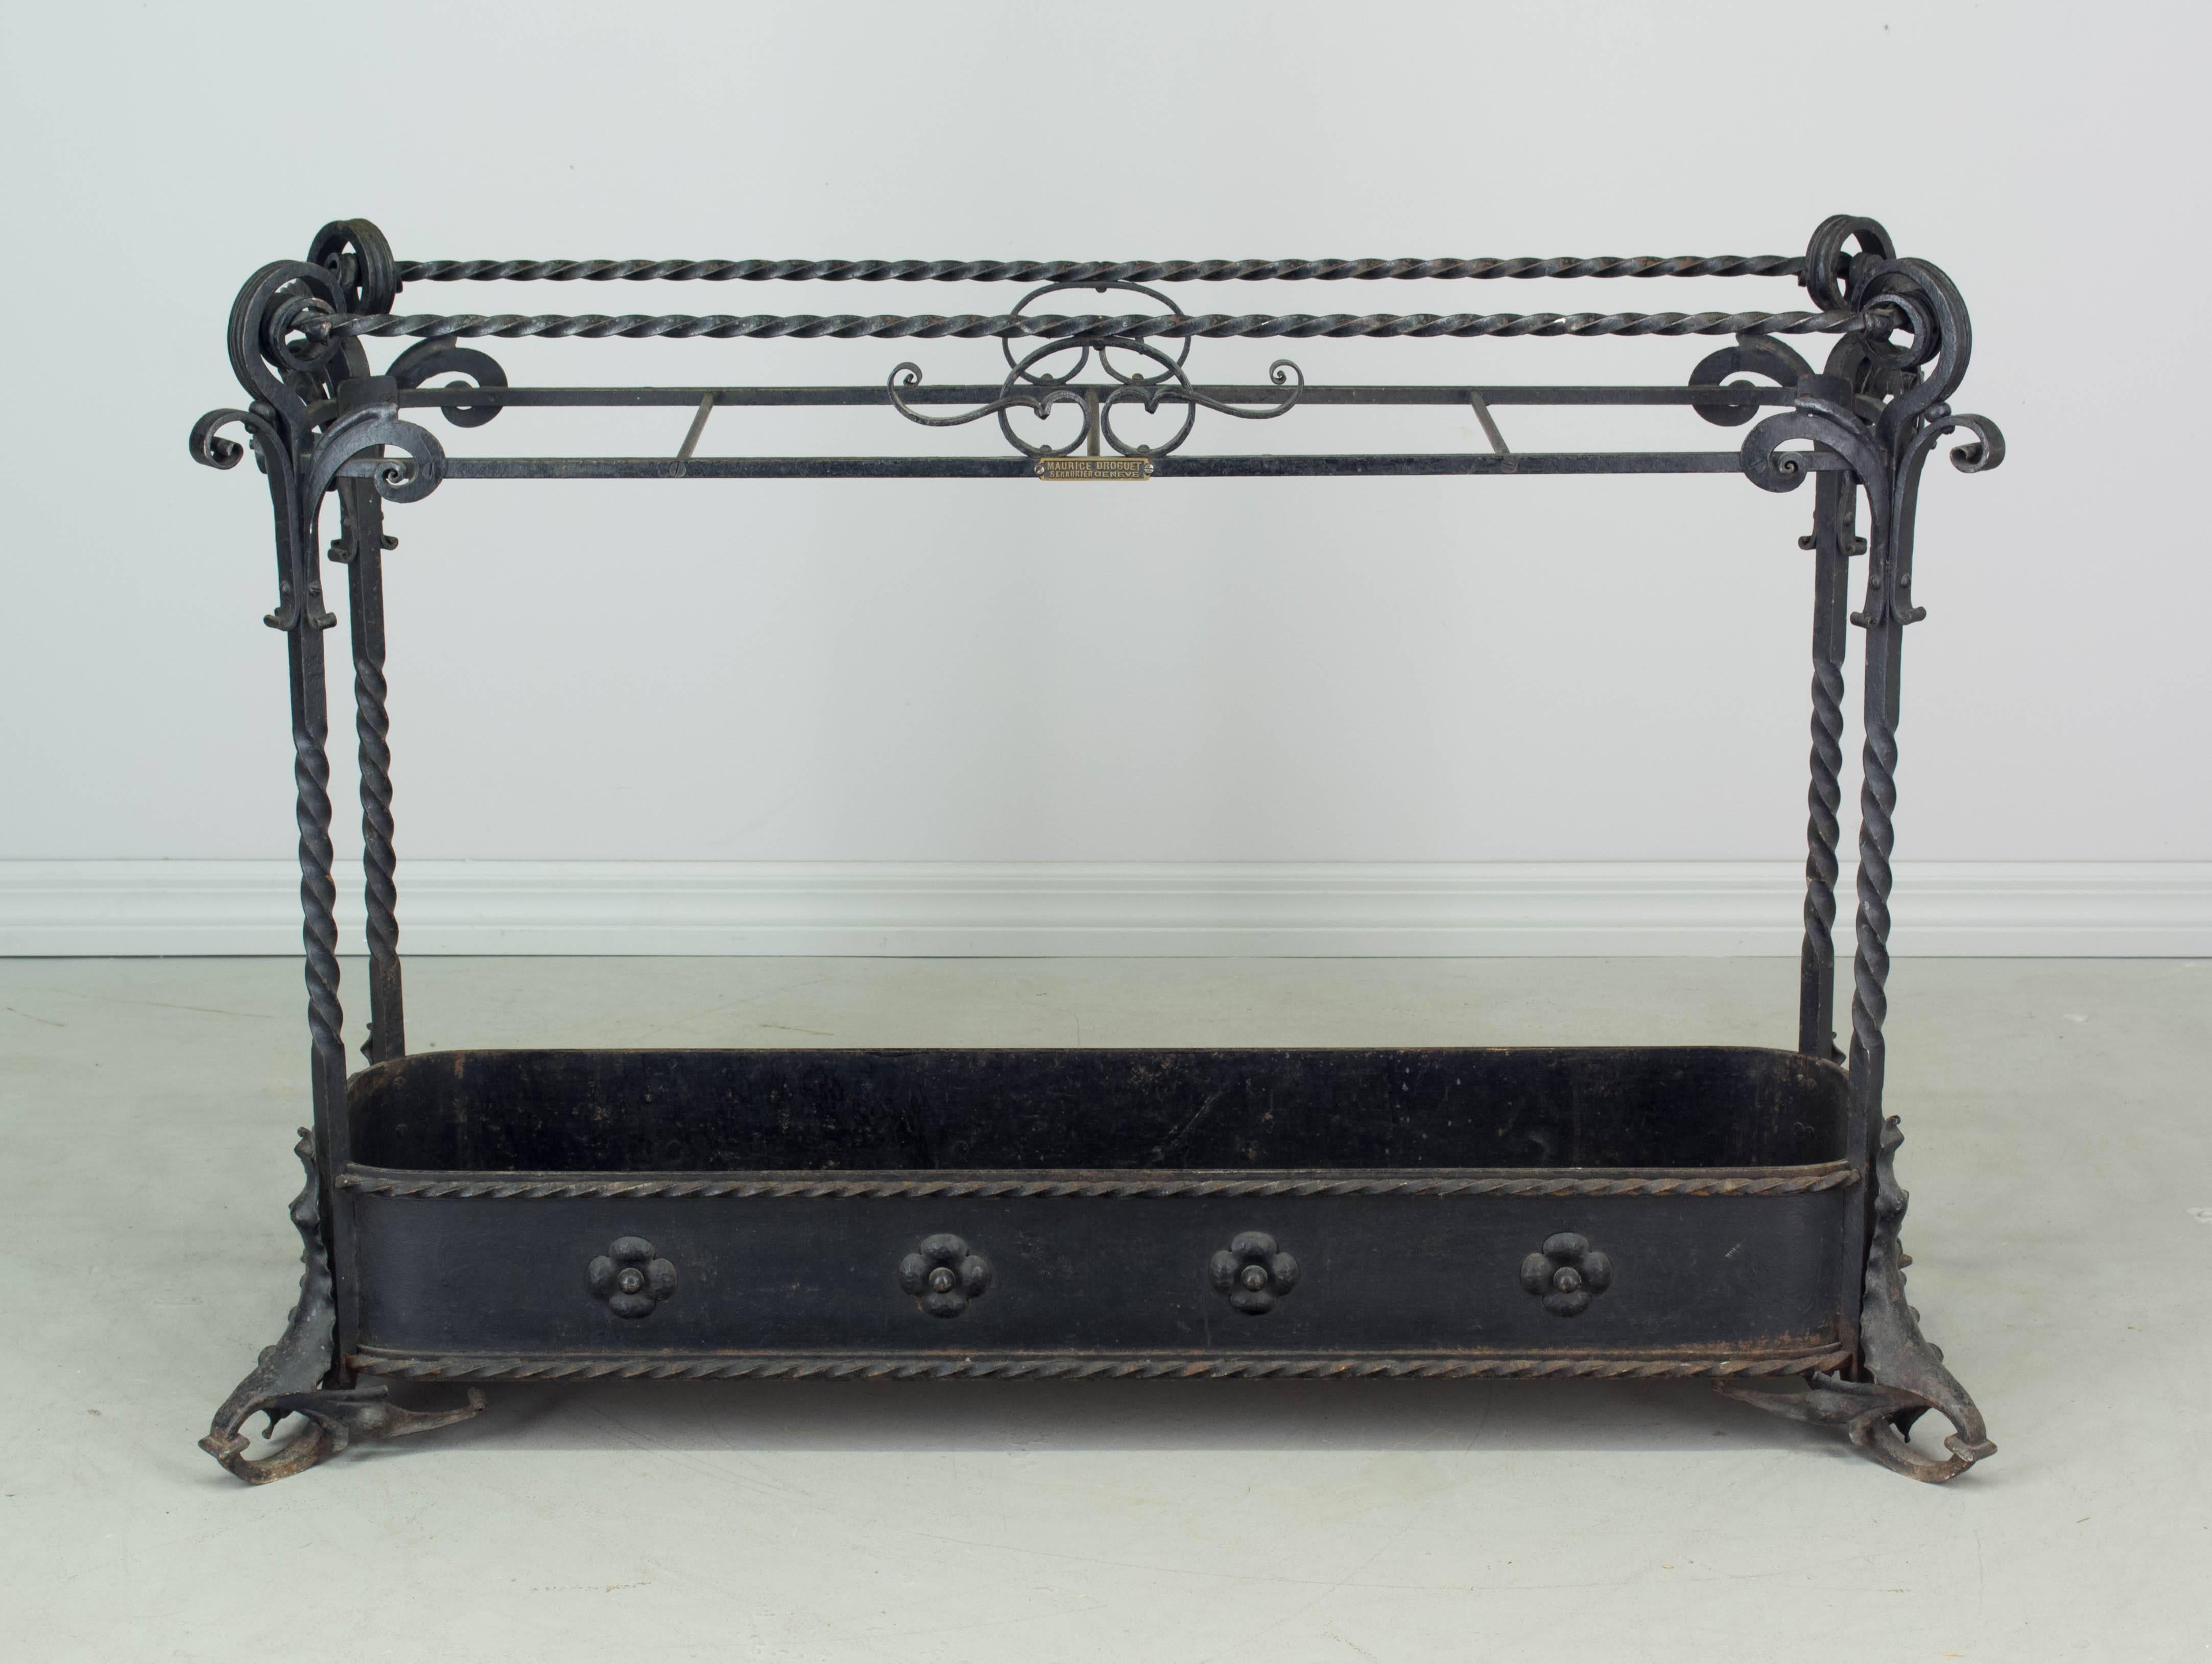 A wrought iron umbrella stand from a Swiss hotel. Excellent craftsmanship with elaborate scrolls and twists, flowers along the bottom and leaf forms at the feet. Metal plaque with the ironworker's name reads: 